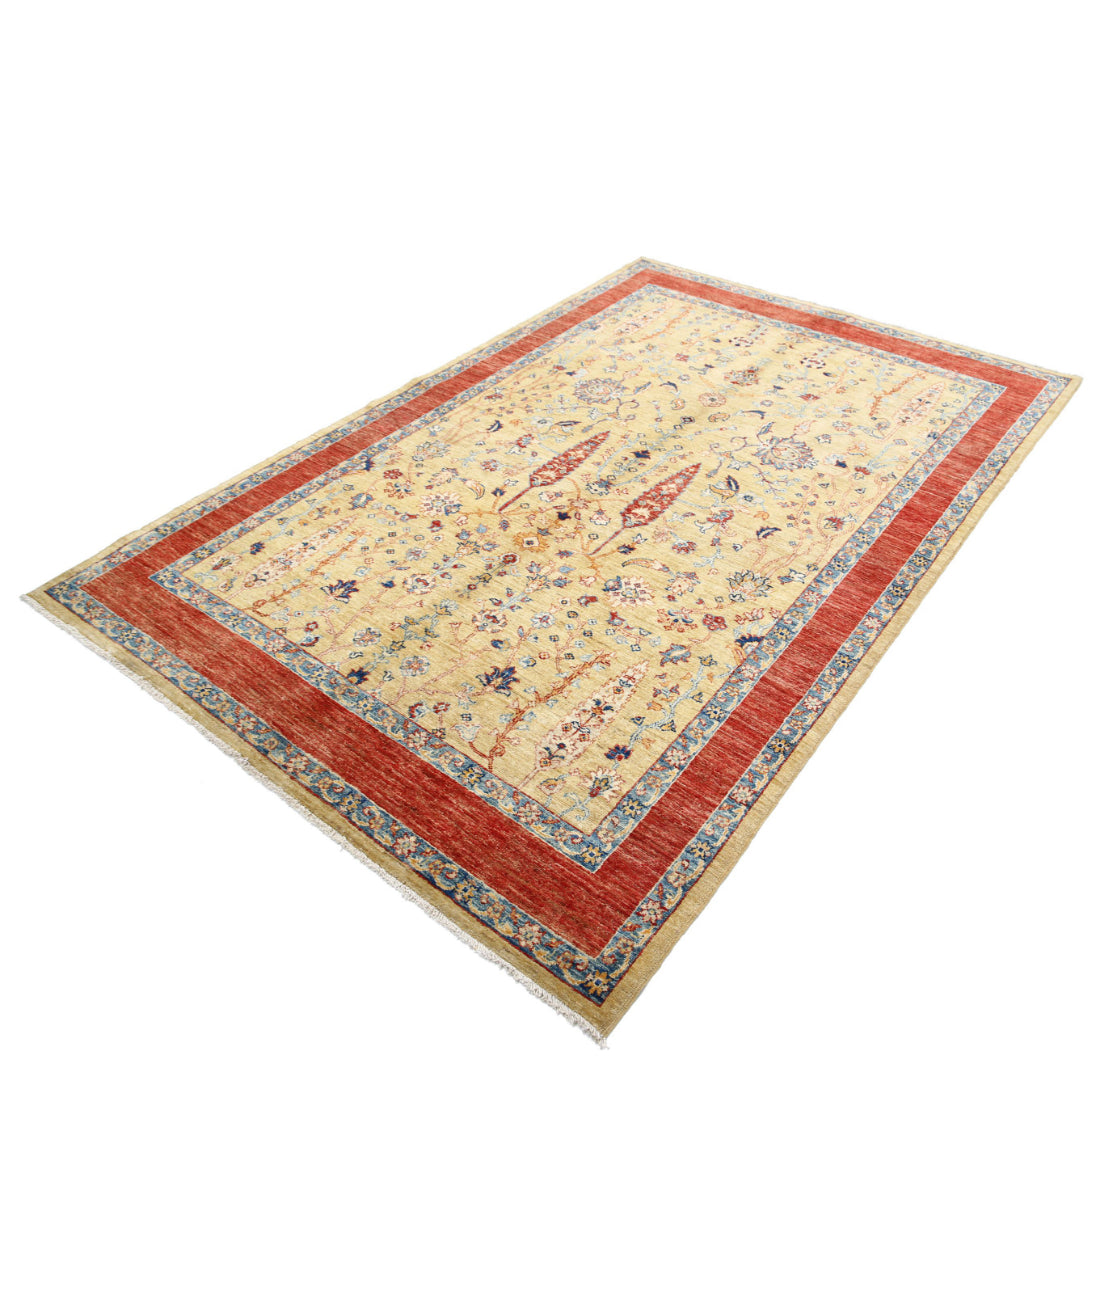 Bakshaish 5'6'' X 8'4'' Hand-Knotted Wool Rug 5'6'' x 8'4'' (165 X 250) / Gold / Red